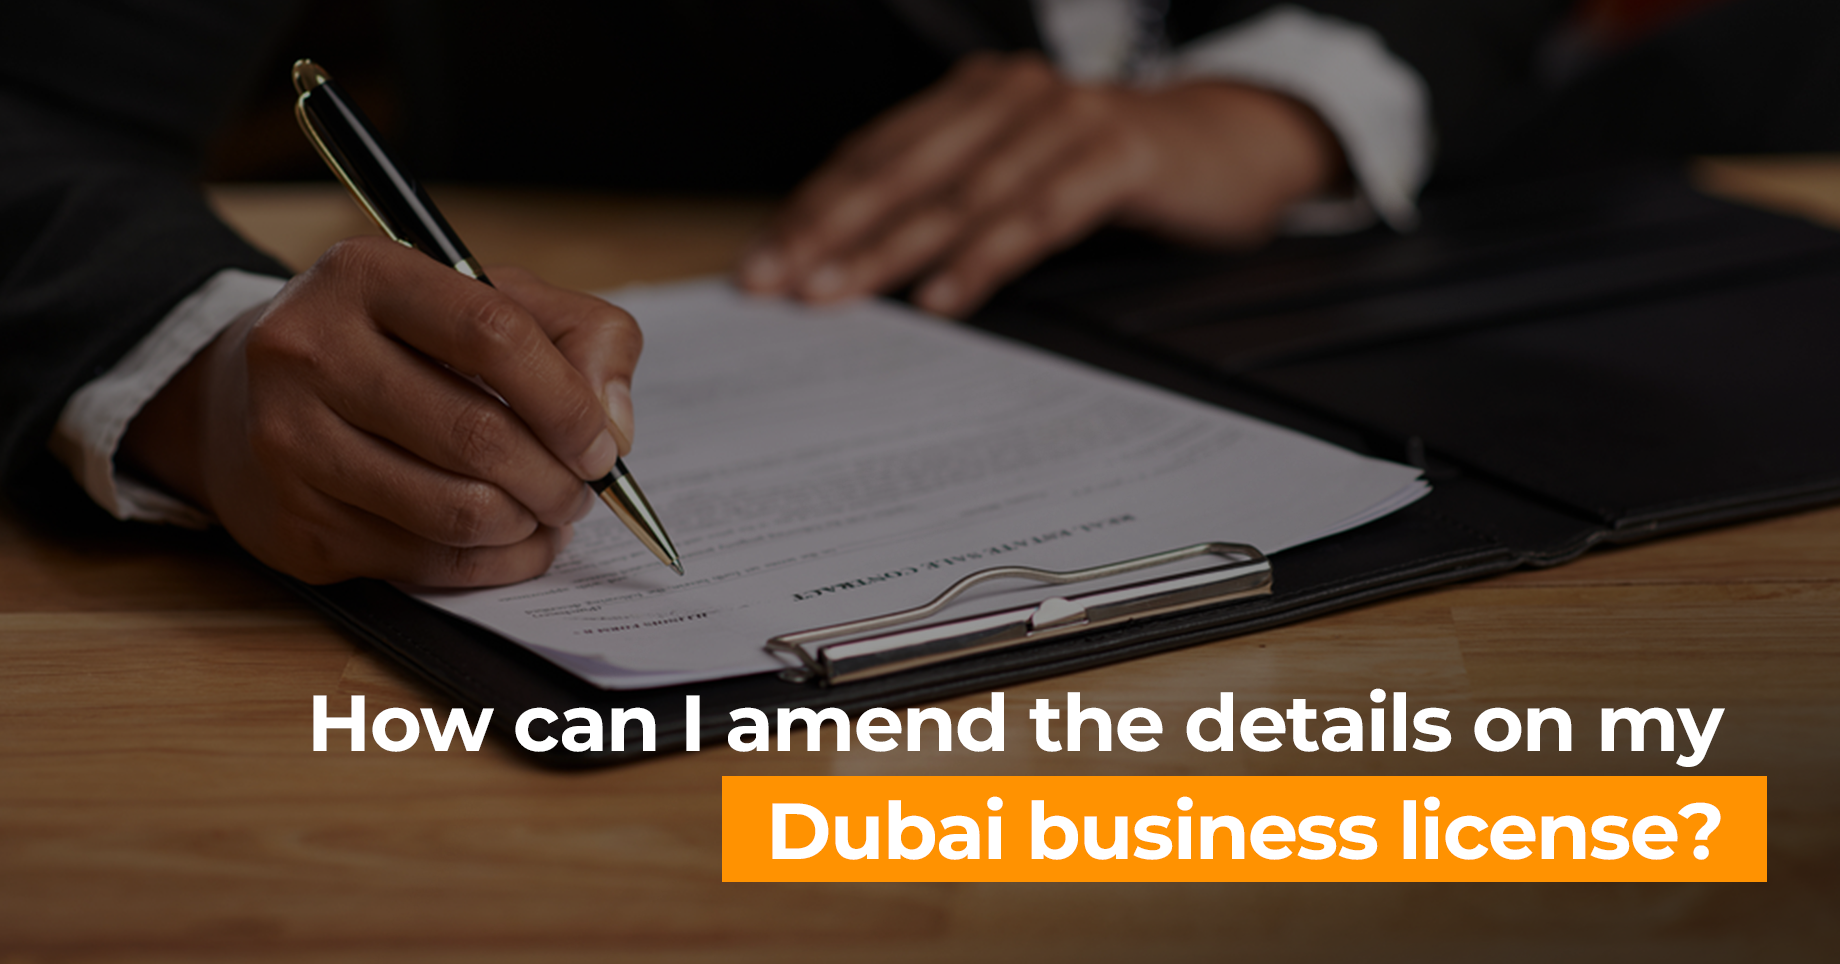 How can I amend the details on my Dubai business license?